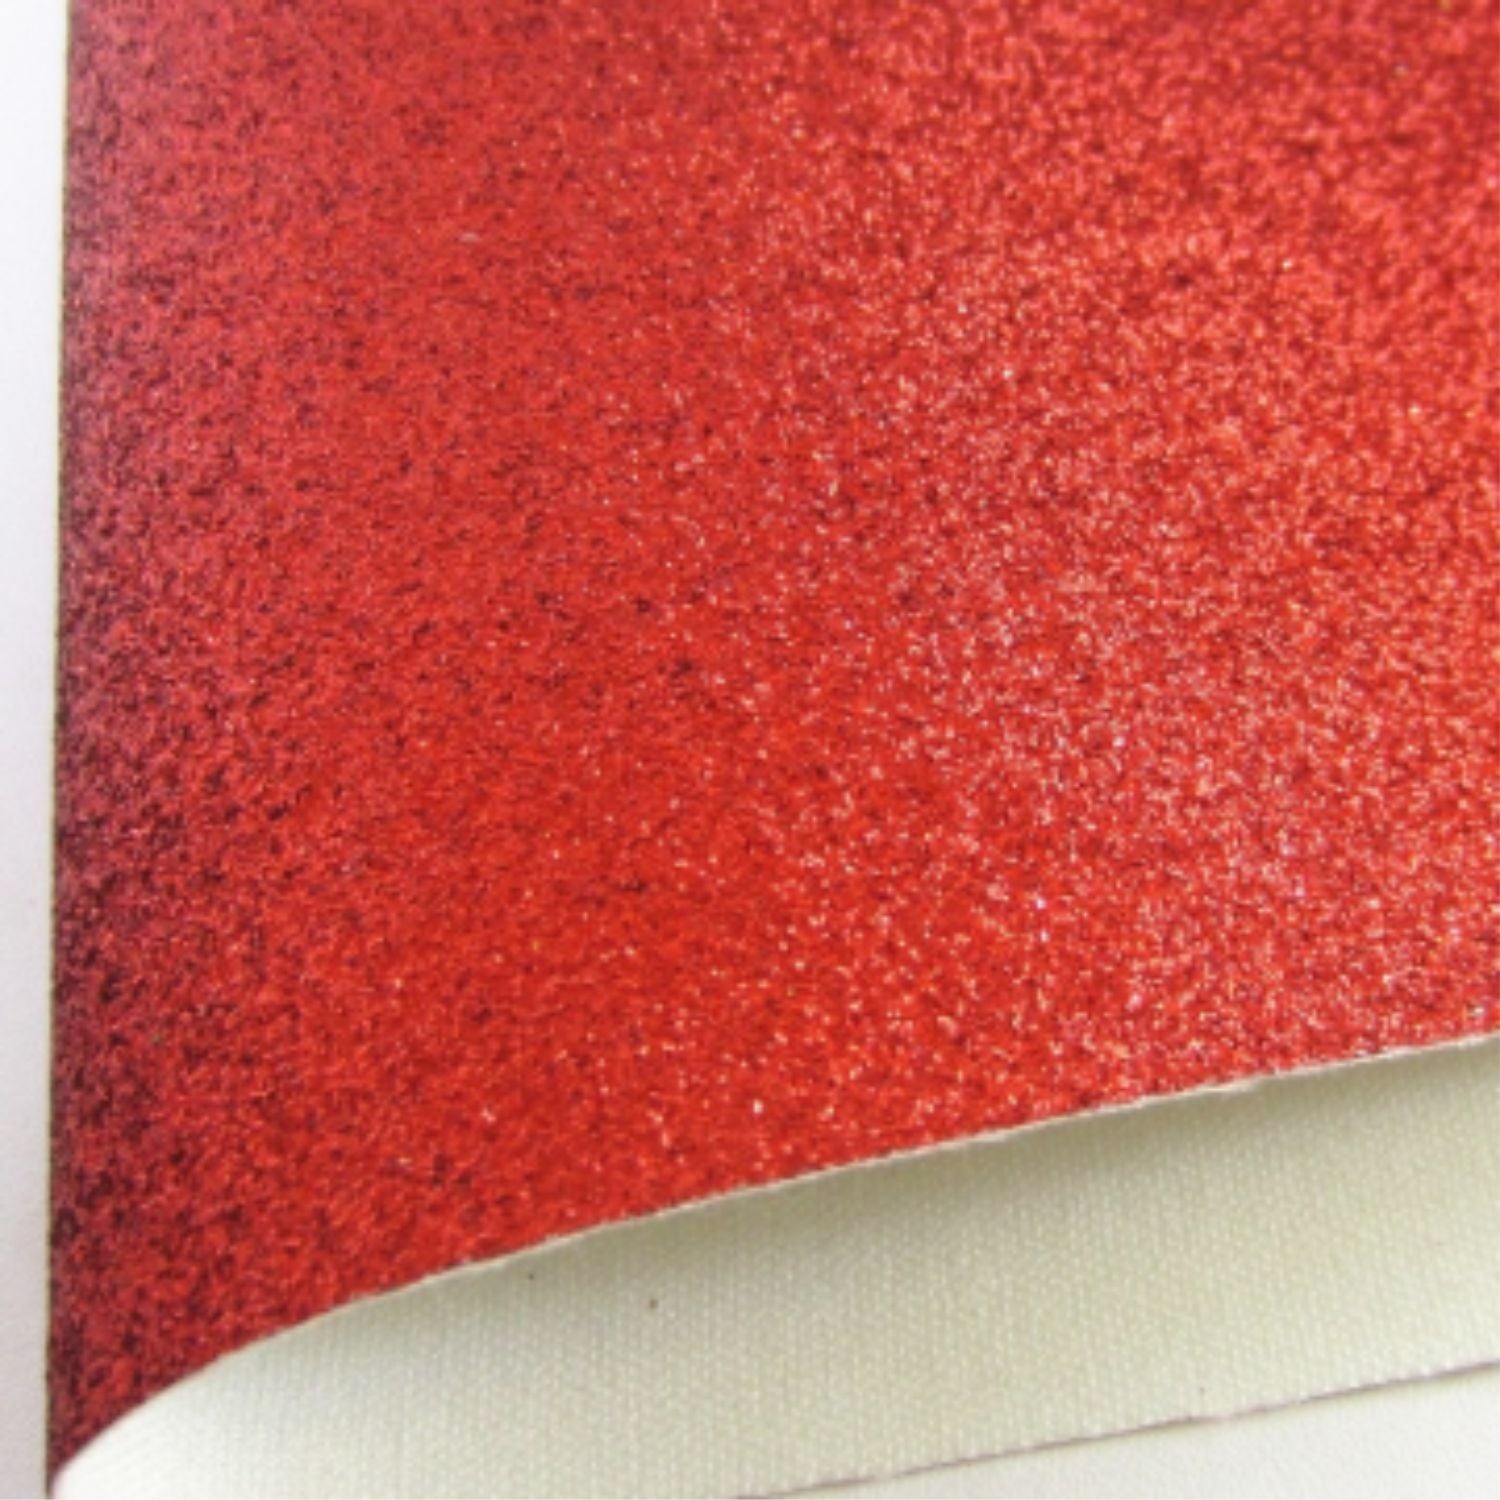 Faux Leather Red Fine Glitter Fabric Synthetic 11.75in x 12in Sheets SALE  While Supplies Last